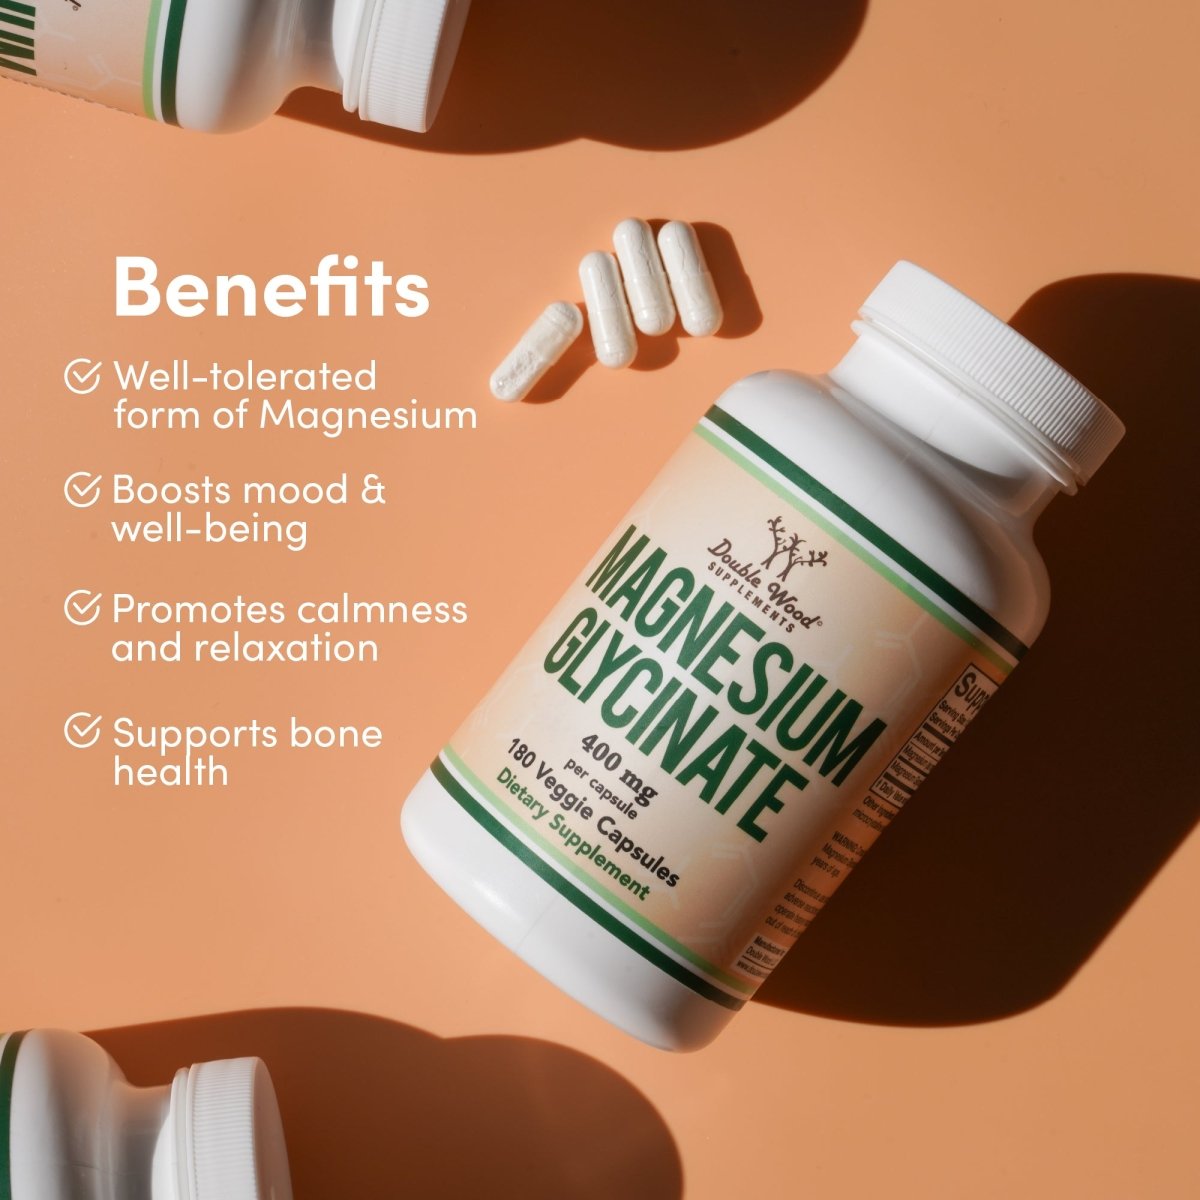 Magnesium Glycinate Double Pack - Double Wood Supplements